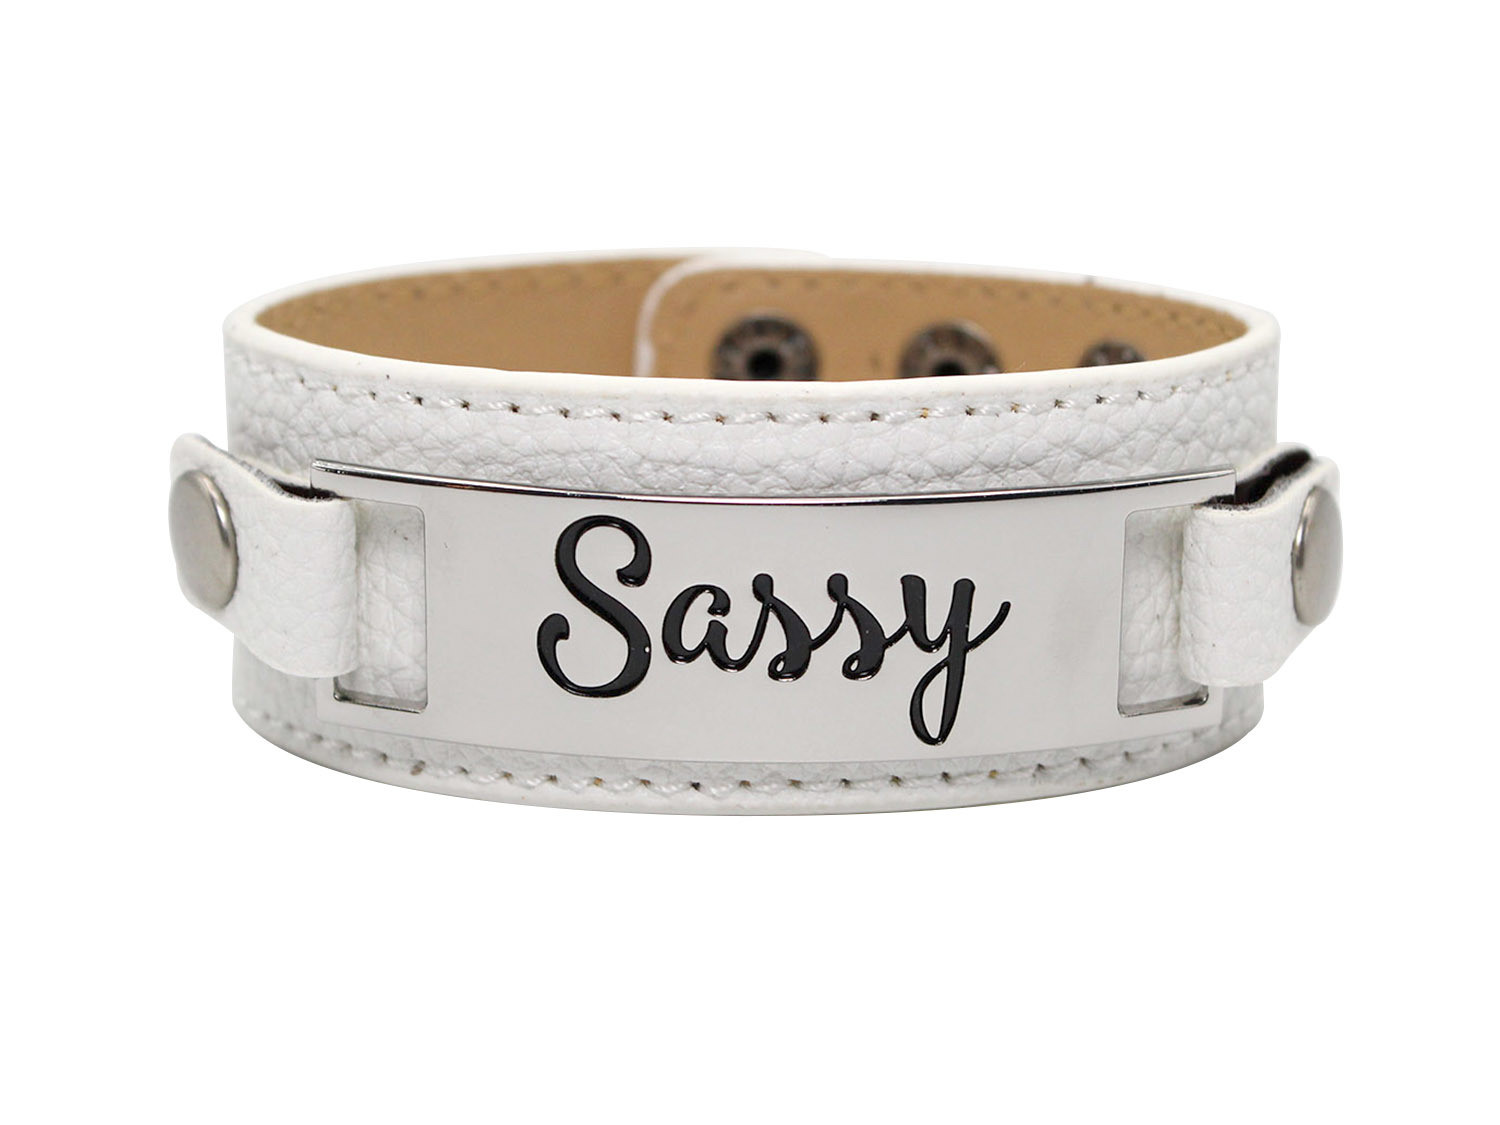 Classic Cuff with Metal Plaque "Sassy"